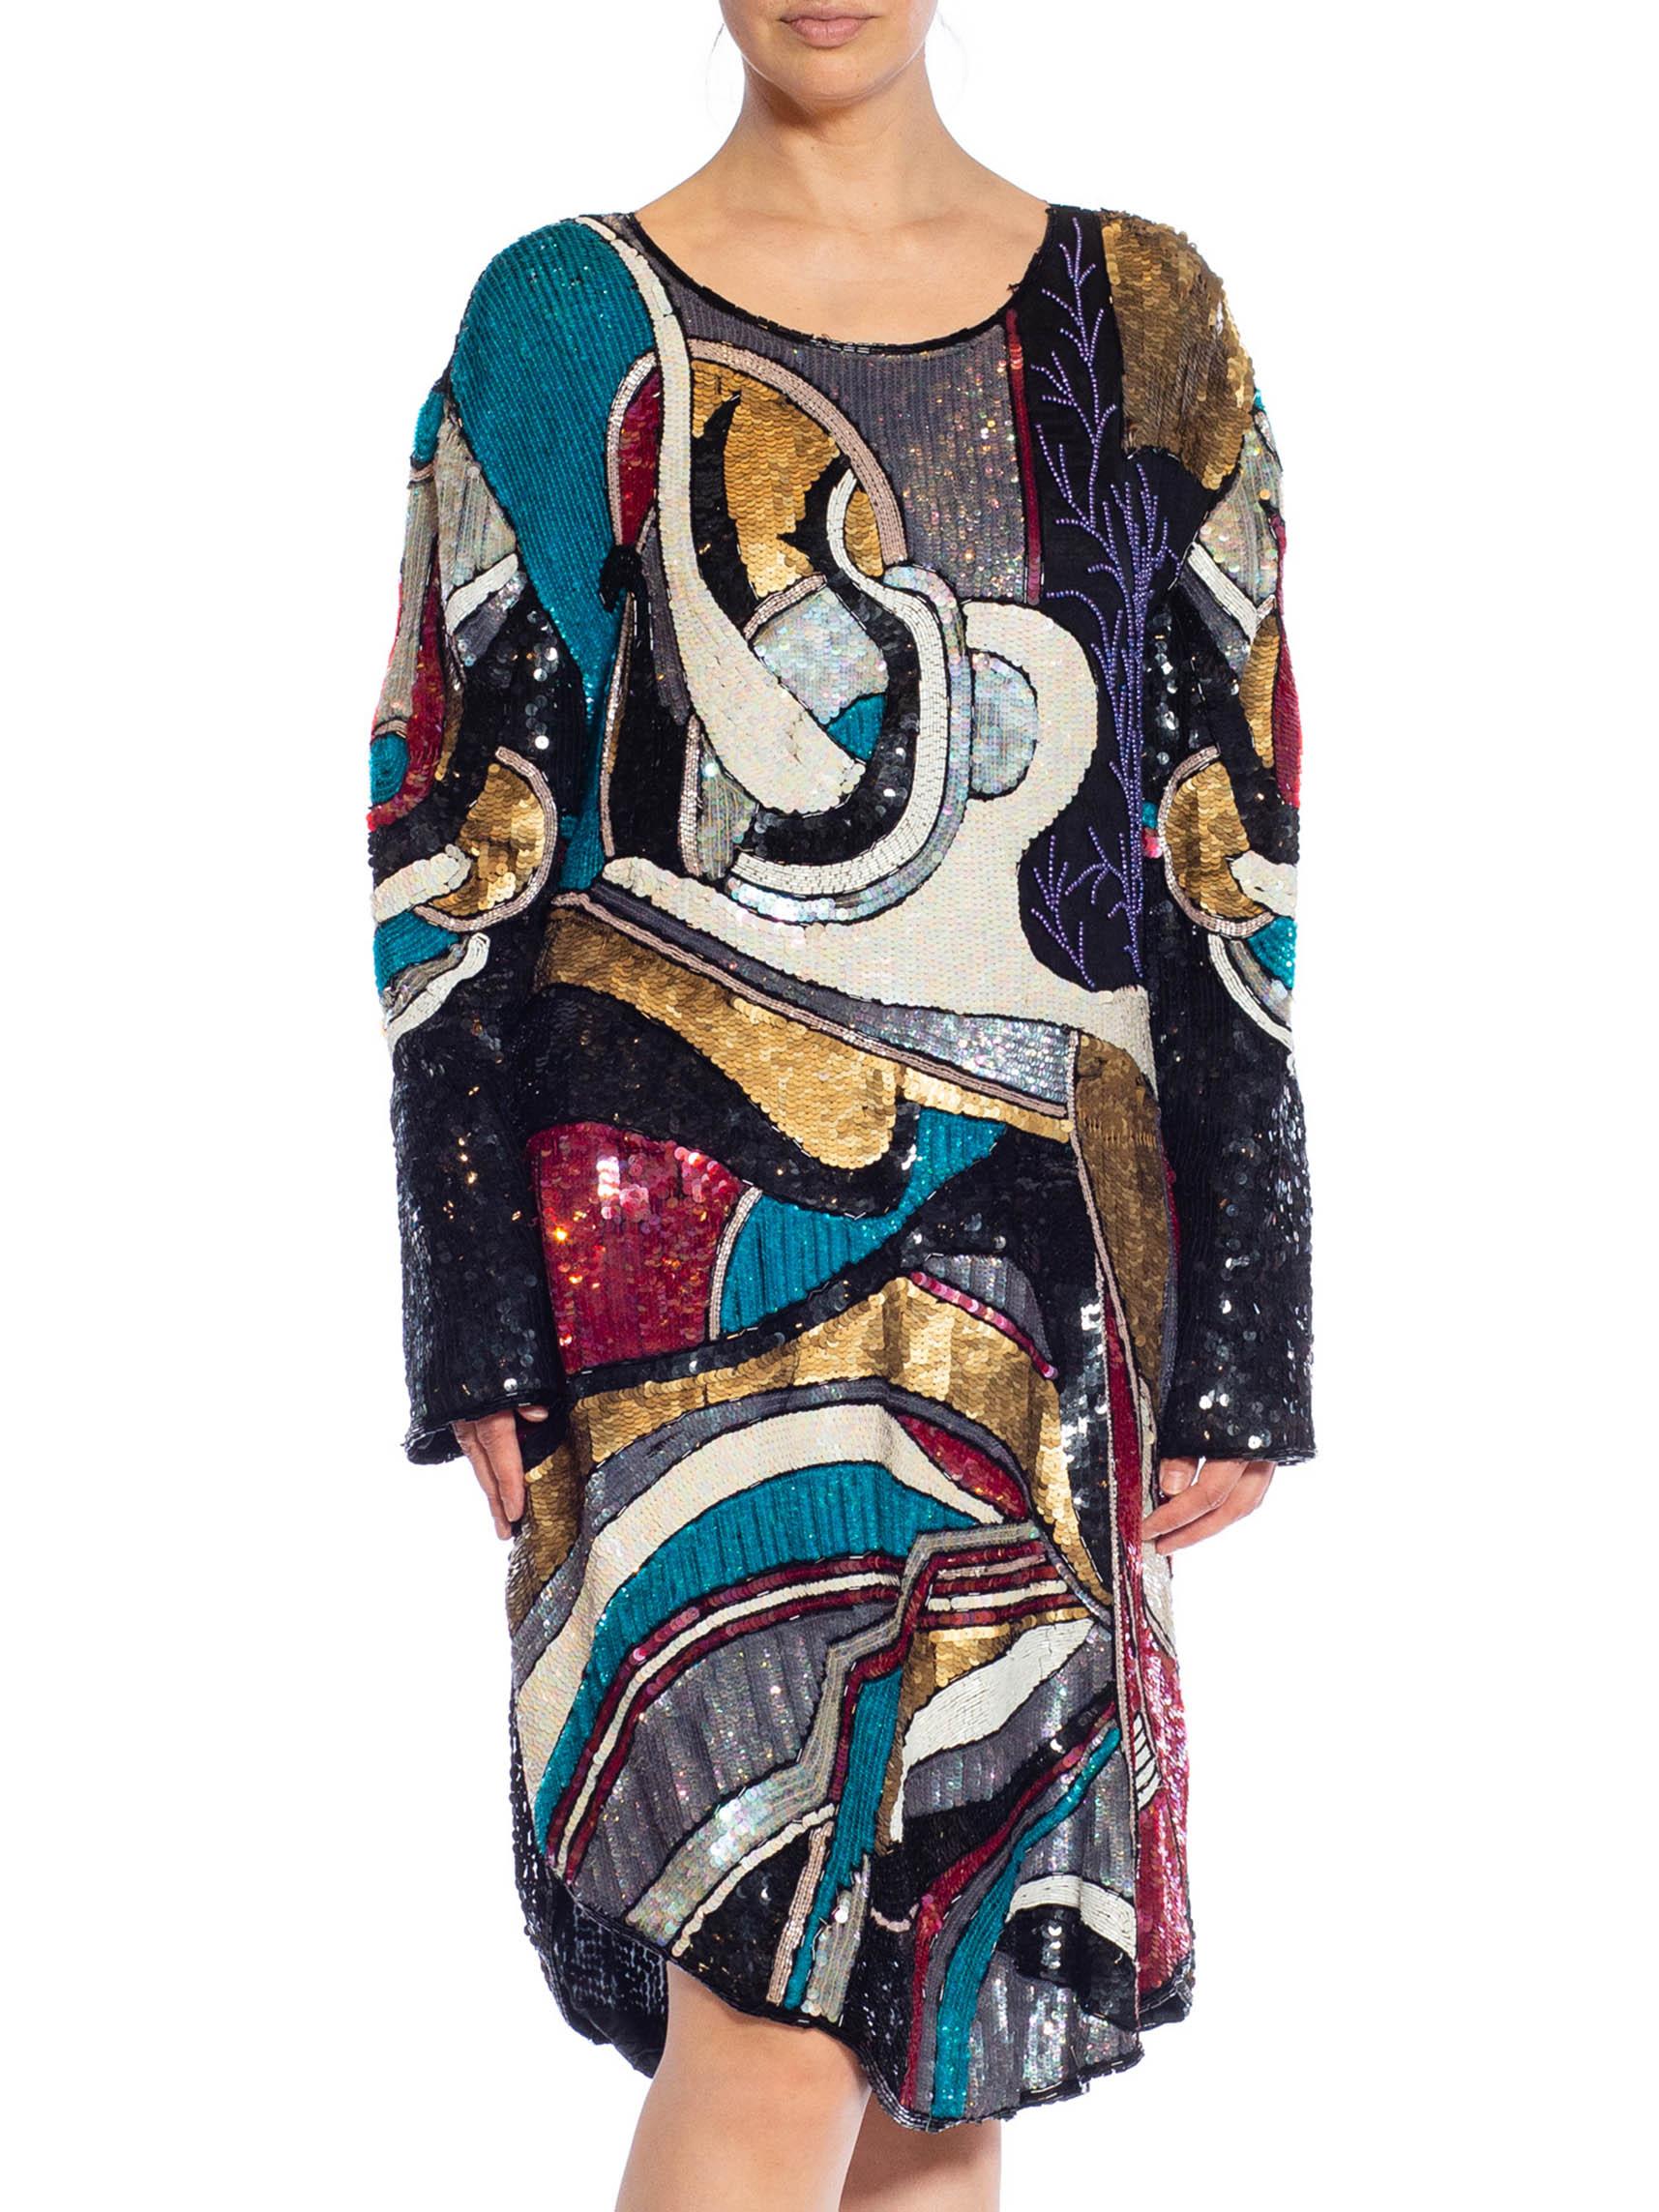 Gunit Fashion N.Y.C
Made in India 1980S Black & White Multicolored Beaded Silk Abstract Art Cocktail Dress 